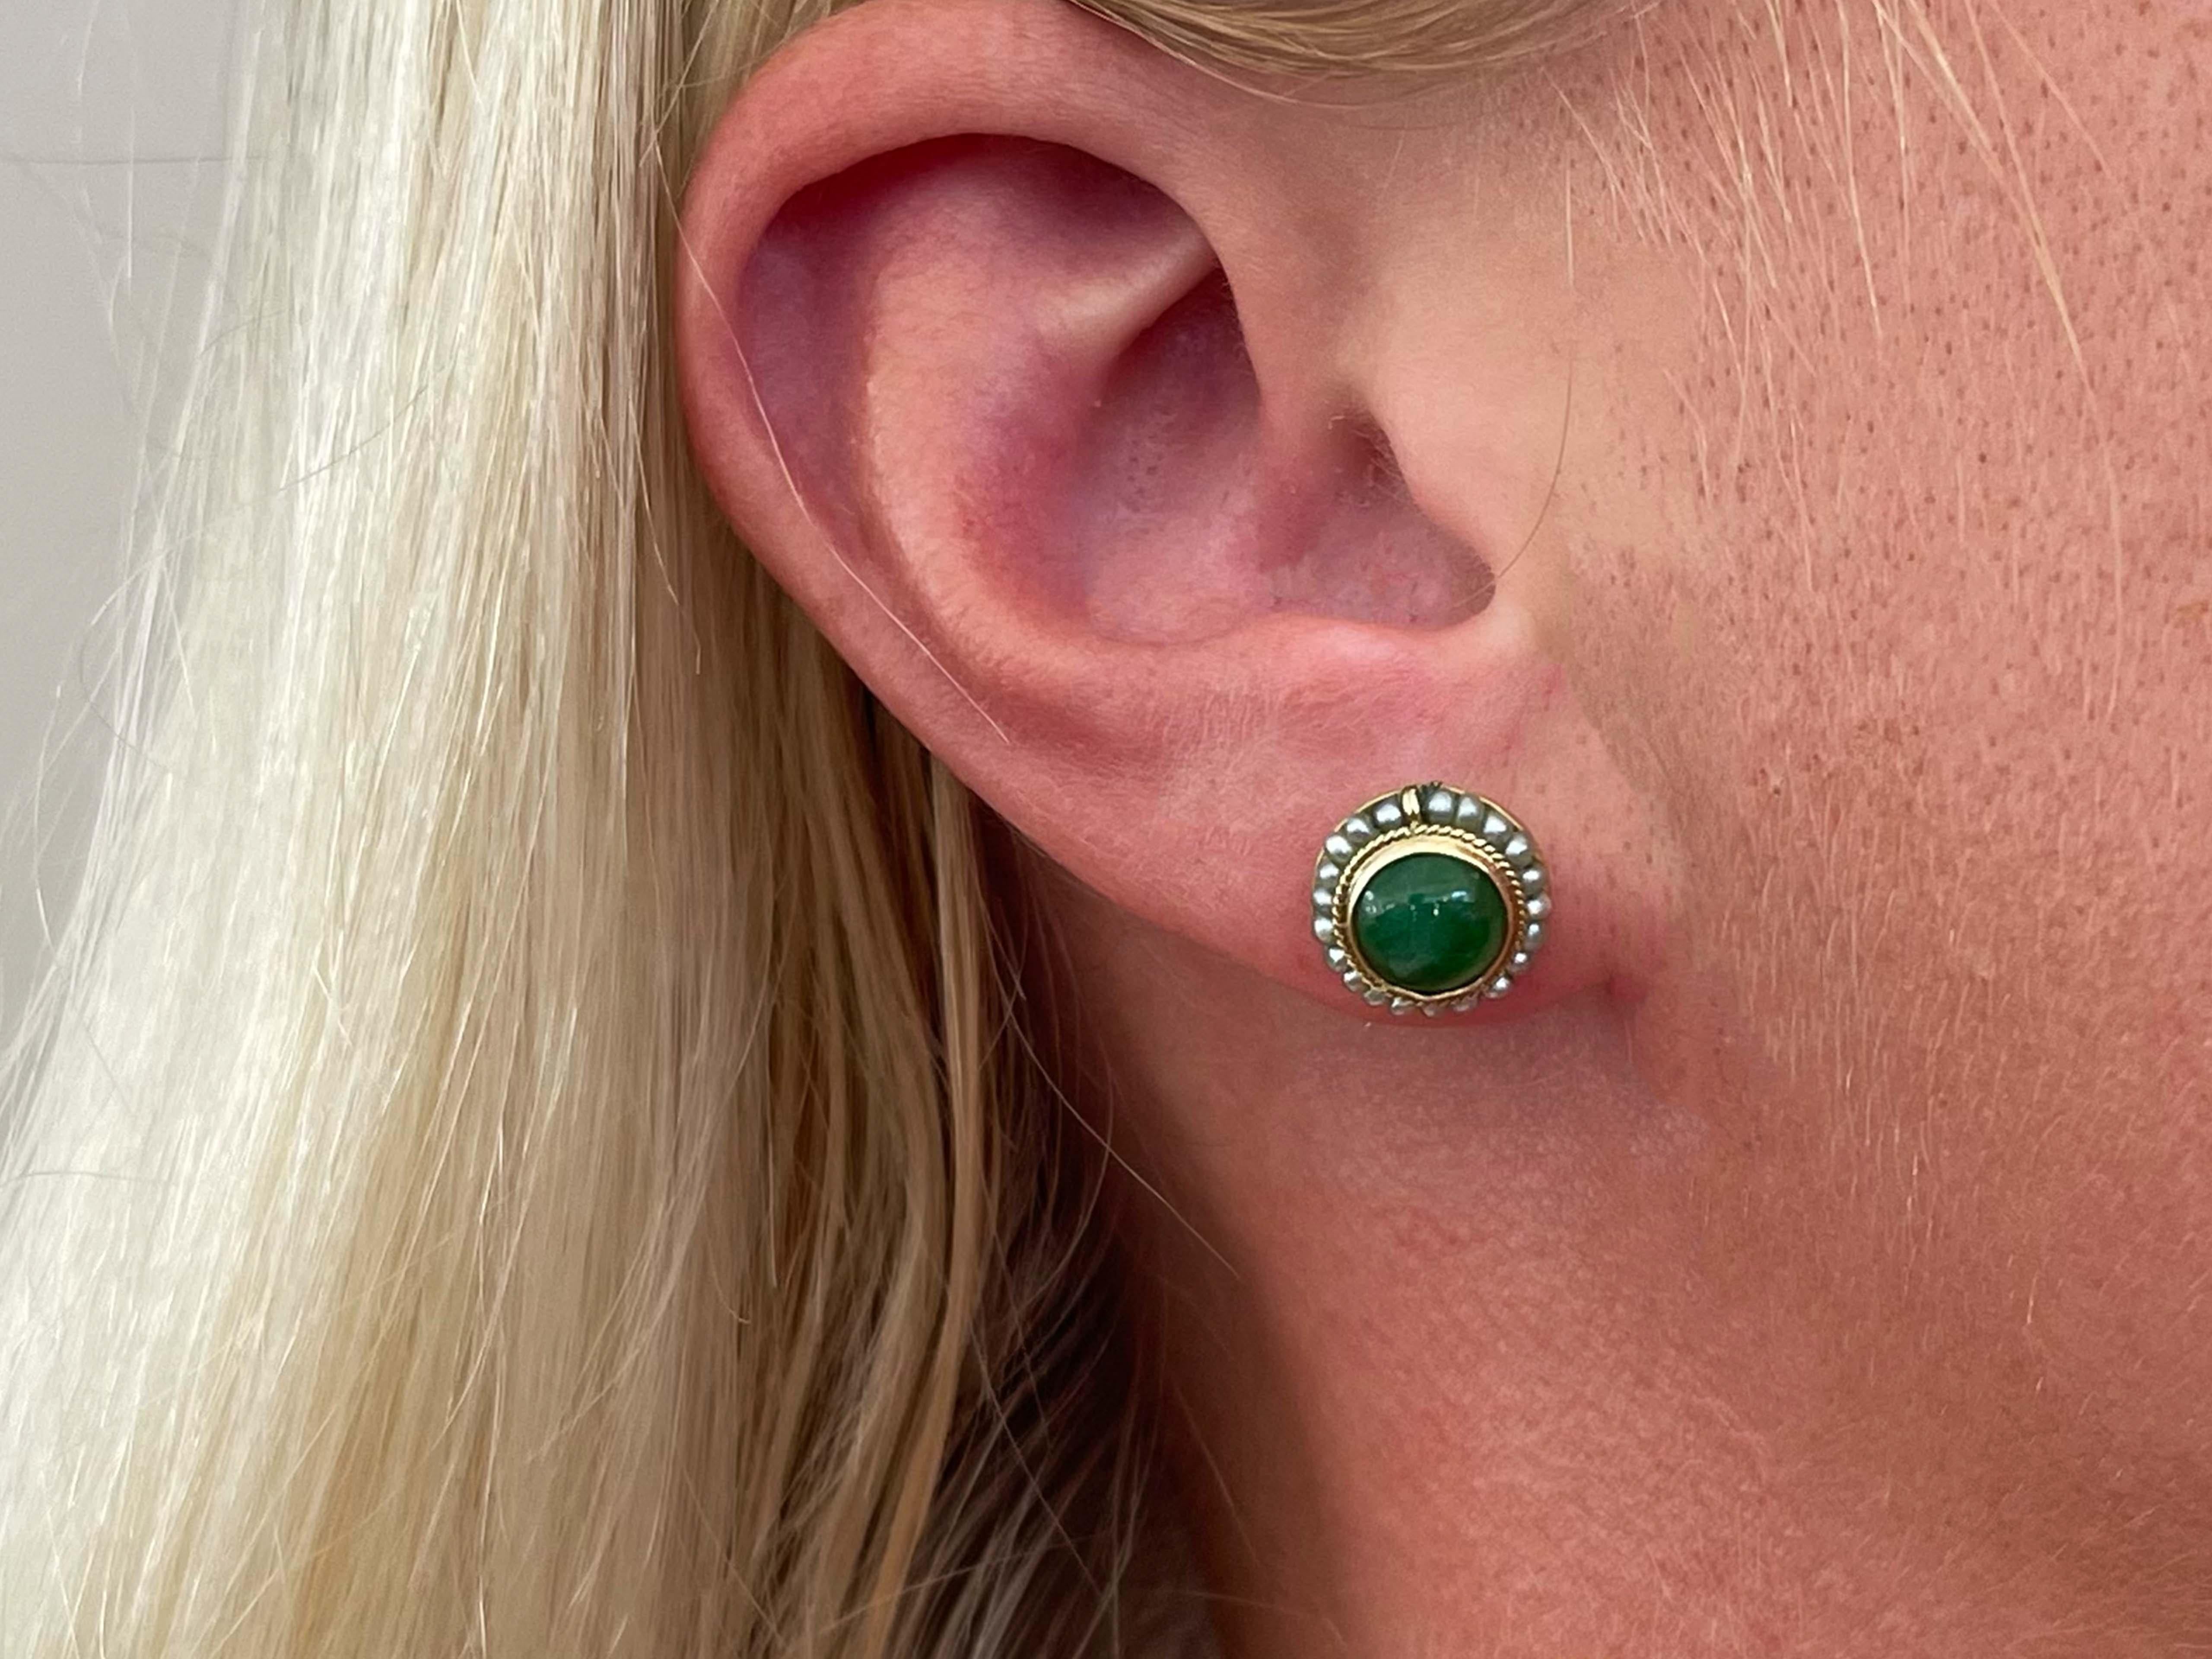 Earrings Specifications:
Metal: 14K Yellow Gold

Total Weight: 1.73 Grams
​
​​GIA Report #: 2235035276

Gemstone Species: Jadeite Jade 
​
​Treatment: Natural color, no indications of impregnation
​
​Jade Measurements: 7.20 mm x 7.30 mm x 3.50